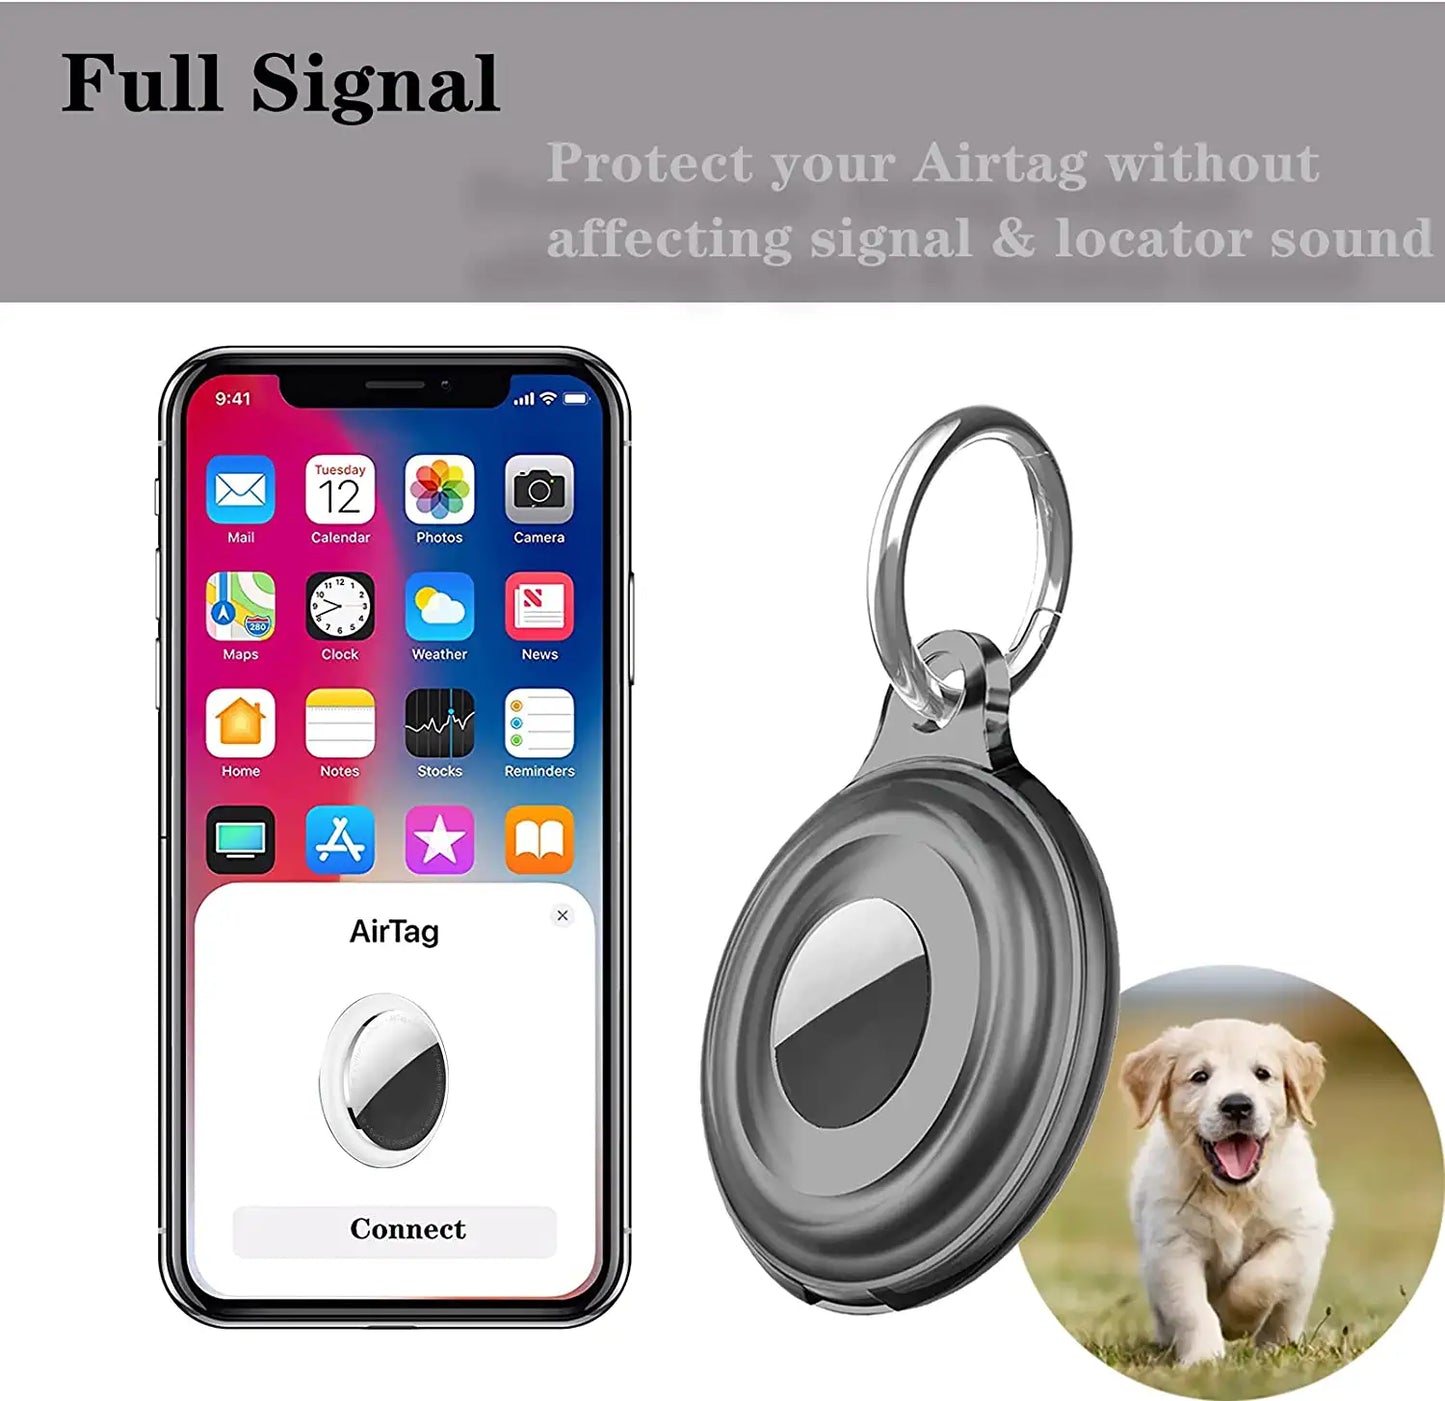 TEAMOLA Airtag Holder, 5Pcs Silicone Waterproof Full Body Protective Case Airtag Keychain Air Tag Case Holder for Kids, Dog, Pet, Backpack - Anti-Scratch - Shockproof - Anti-Loss Airtag Accessories